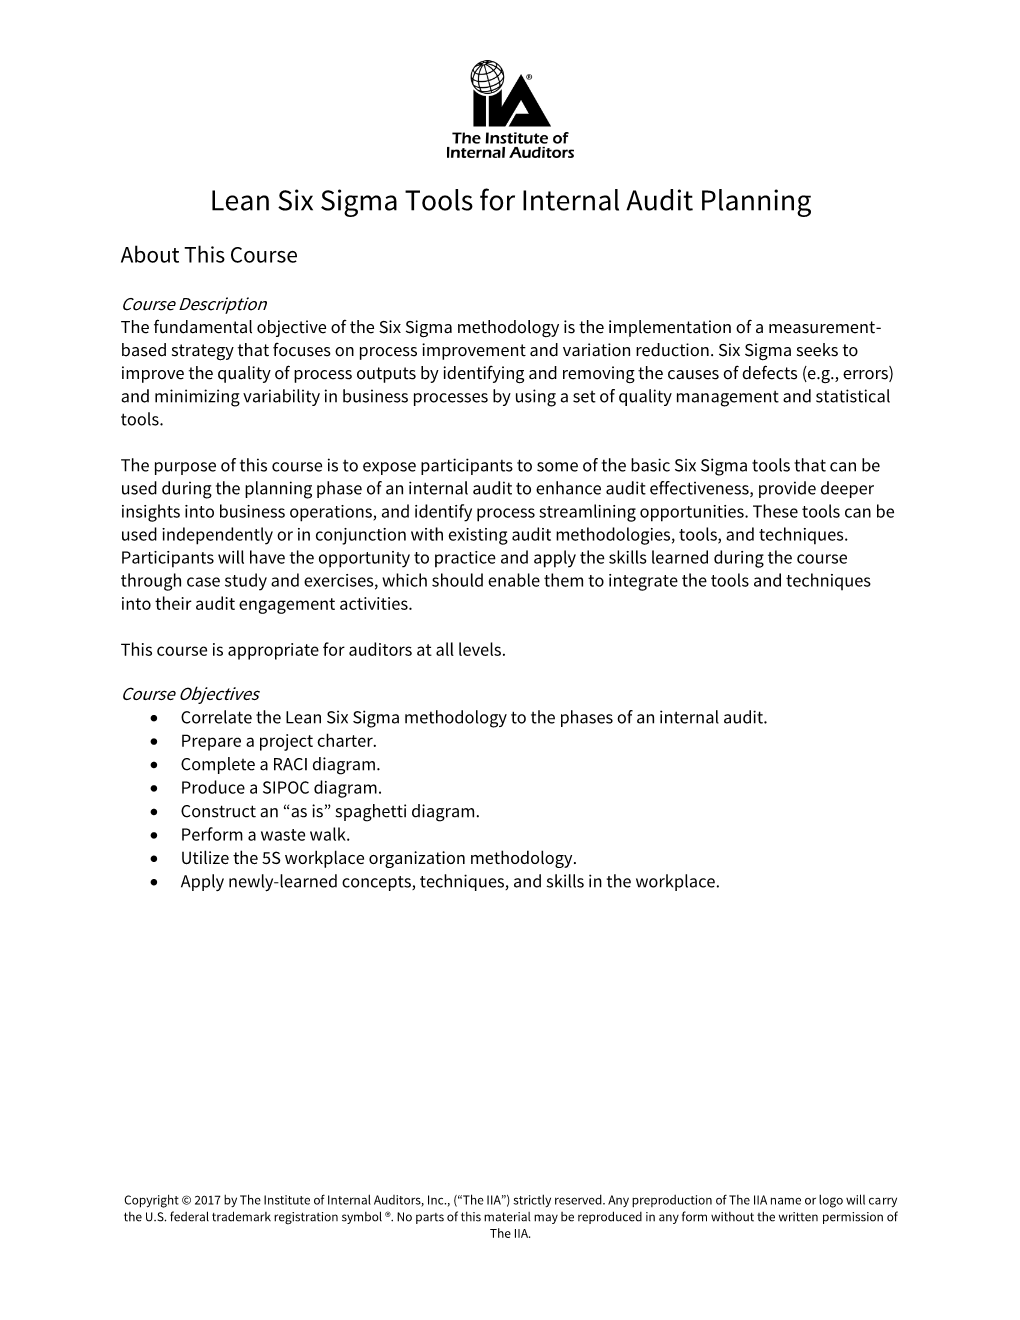 Lean Six Sigma Tools for Internal Audit Planning